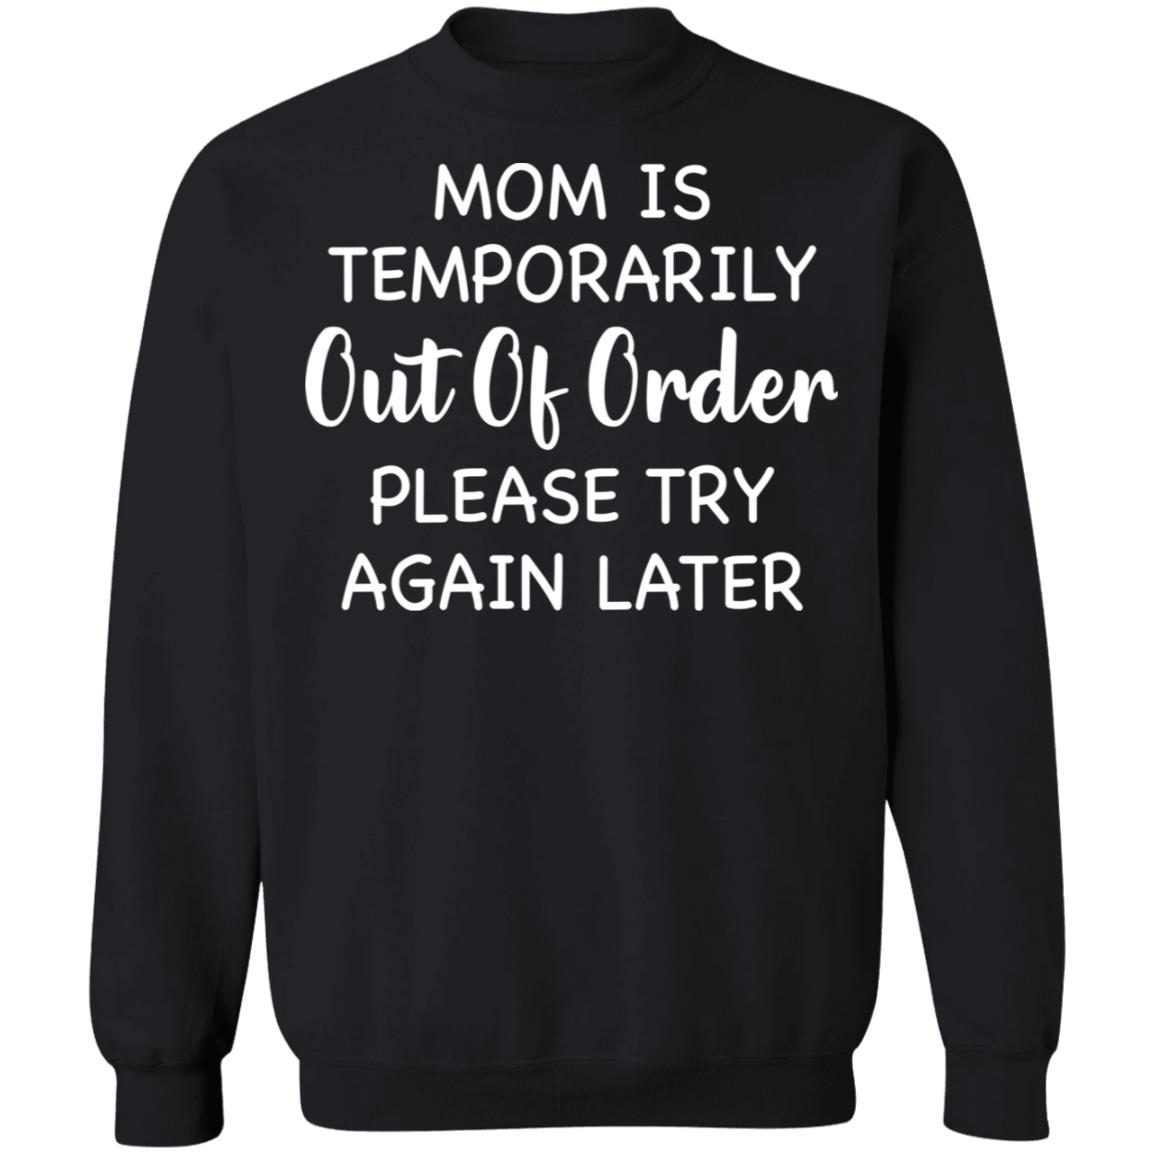 Mom is temporarily out of order please try again later shirt 6